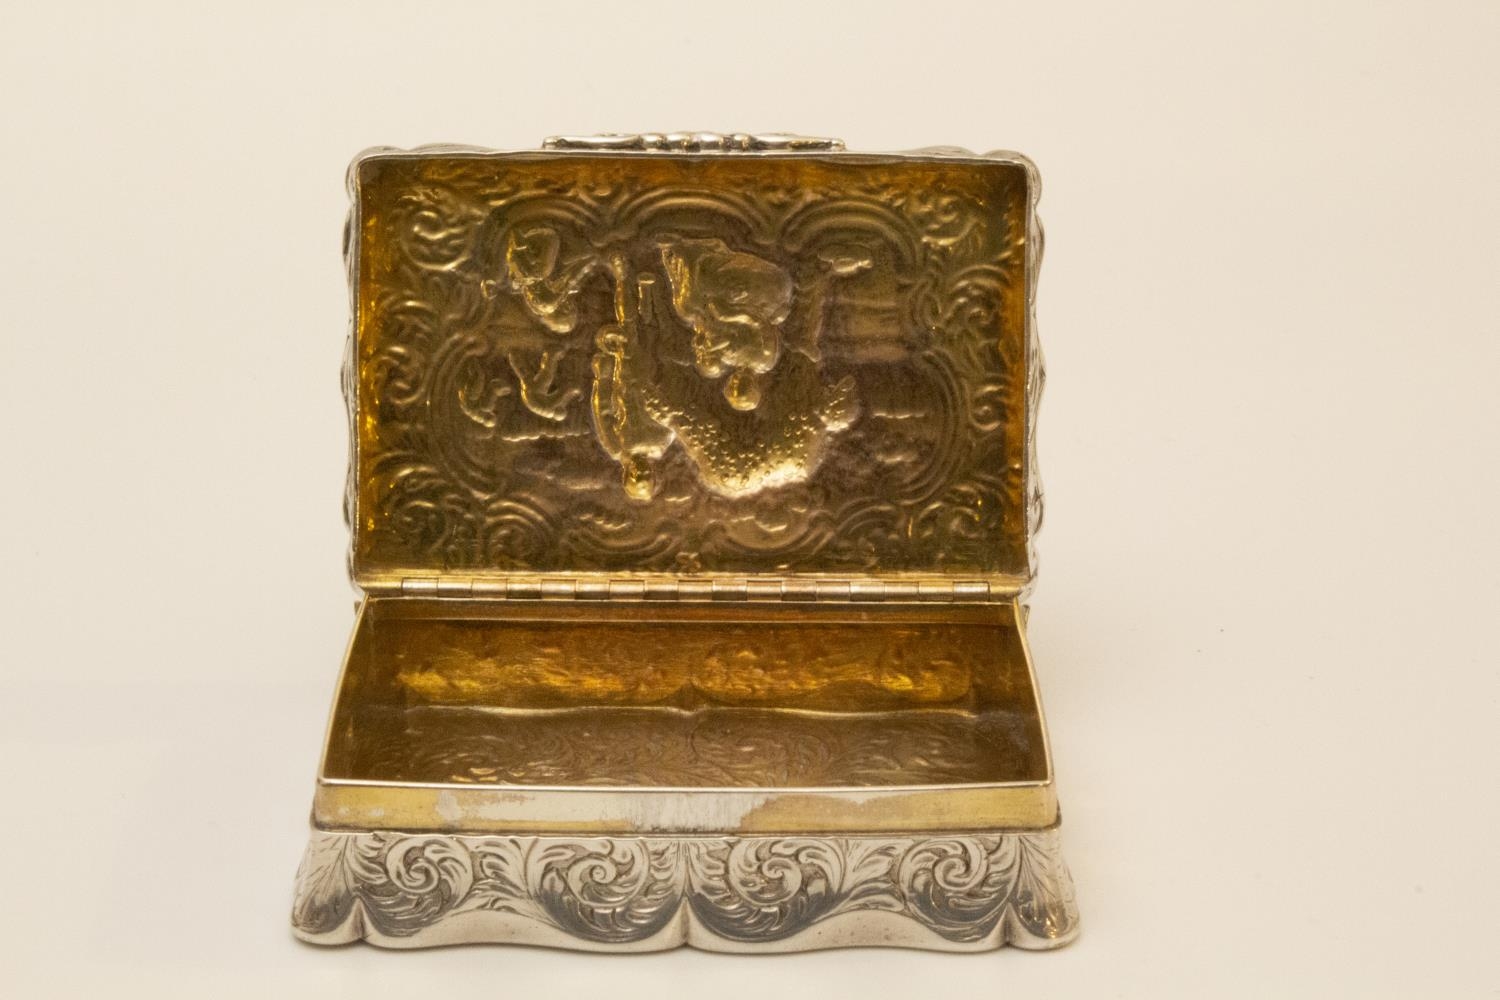 A George IV Sterling Silver Table Snuff Box. Edward Smith. Birmingham 1829. Embossed with figures in - Image 2 of 4